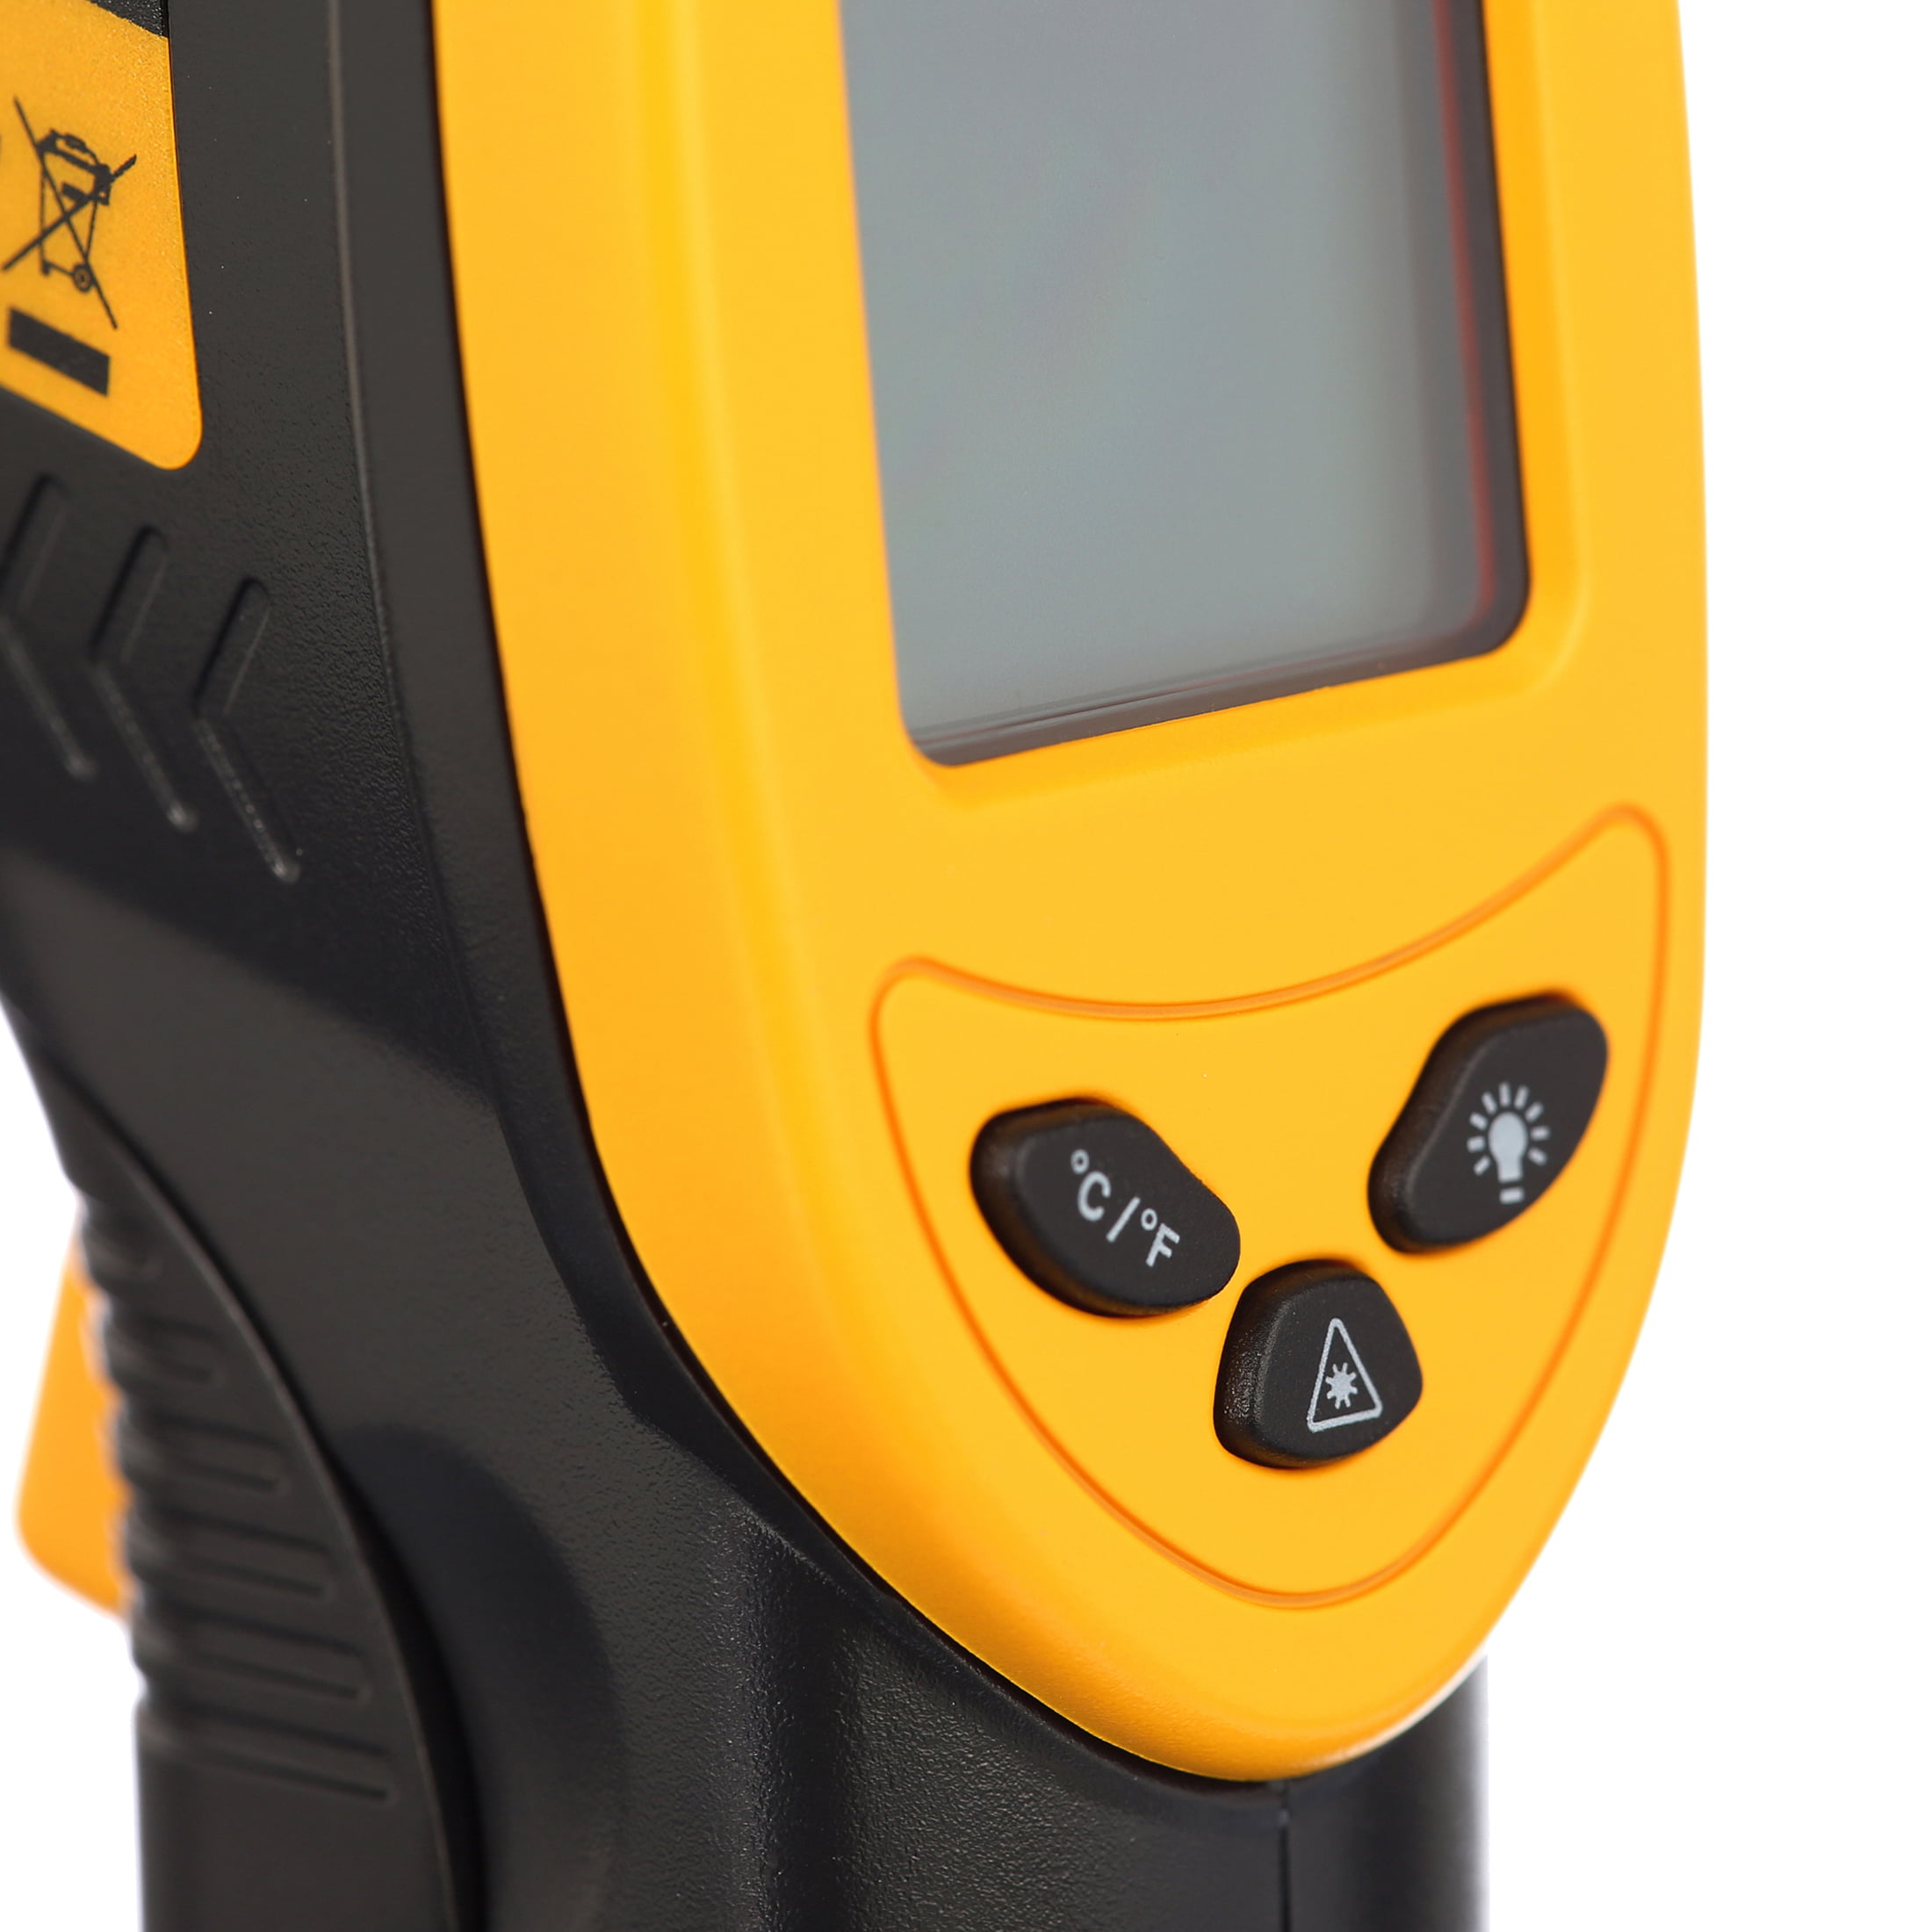 Black/Yellow for sale online Etekcity Lasergrip 749 Digital Infrared Thermometer 